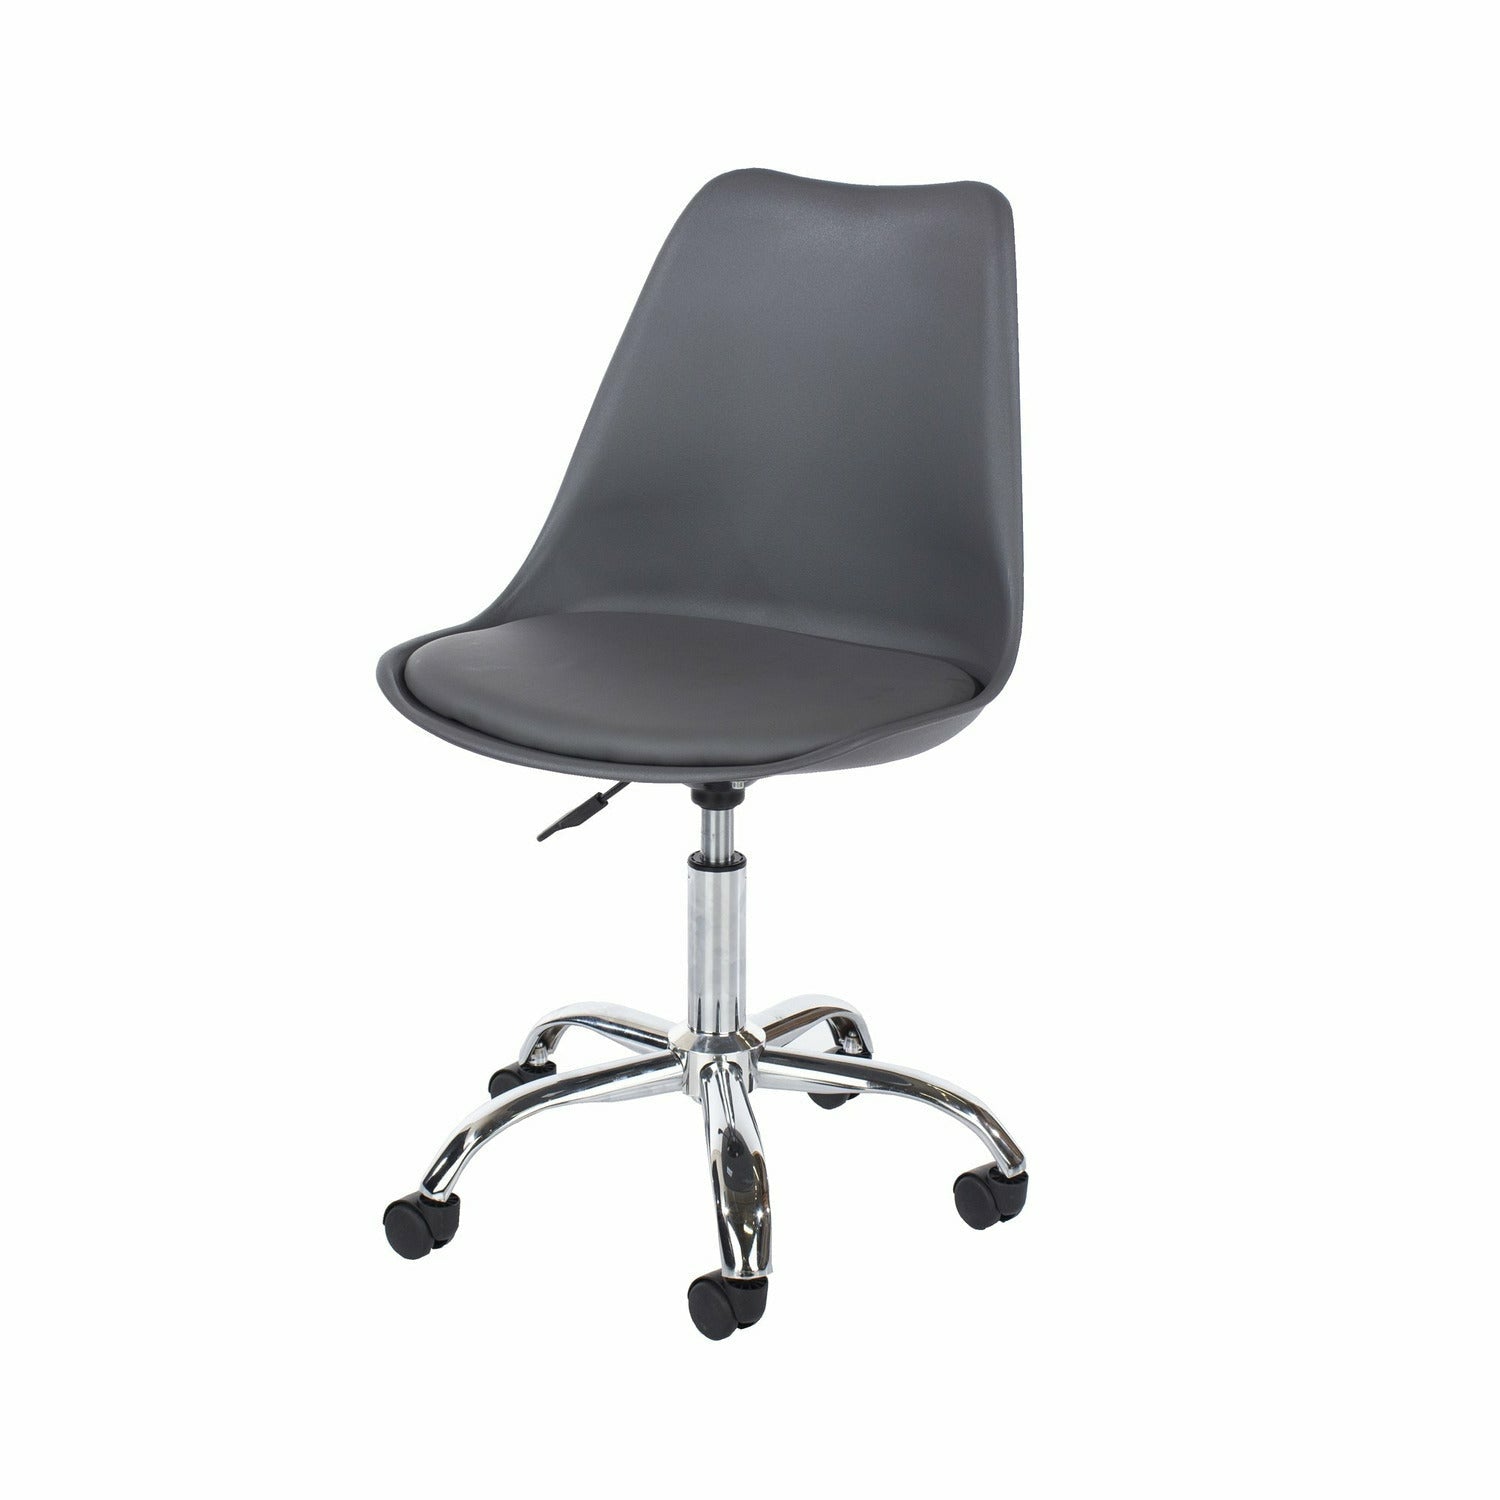 Aspen home studio chair with upholstered seat in dark grey